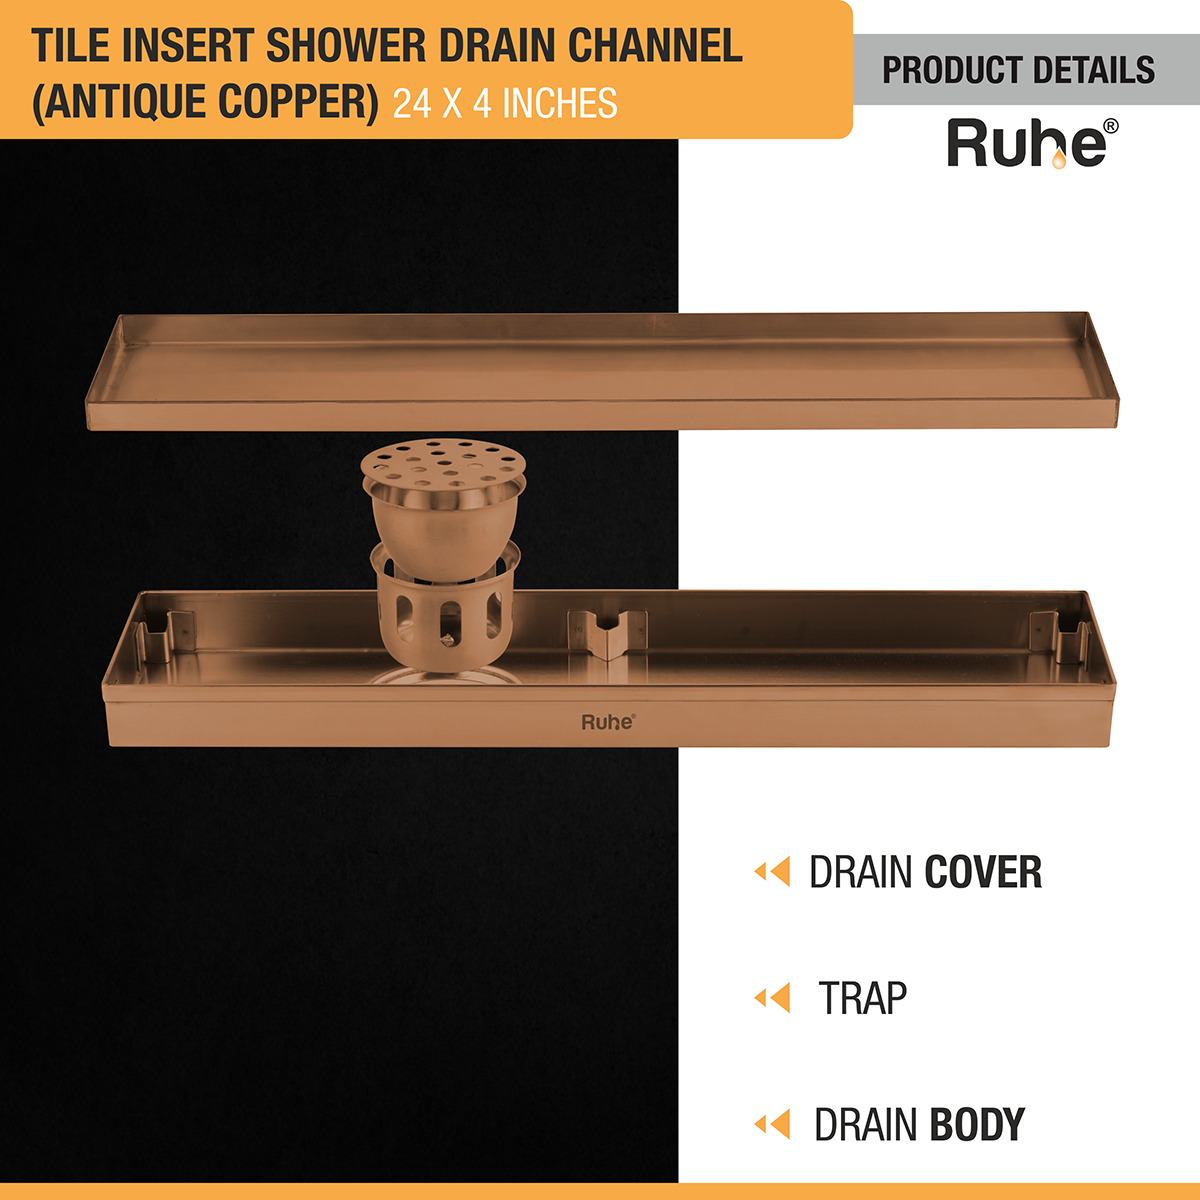 Tile Insert Shower Drain Channel (24 x 4 Inches) ROSE GOLD PVD Coated with drain cover, trap, and drain body